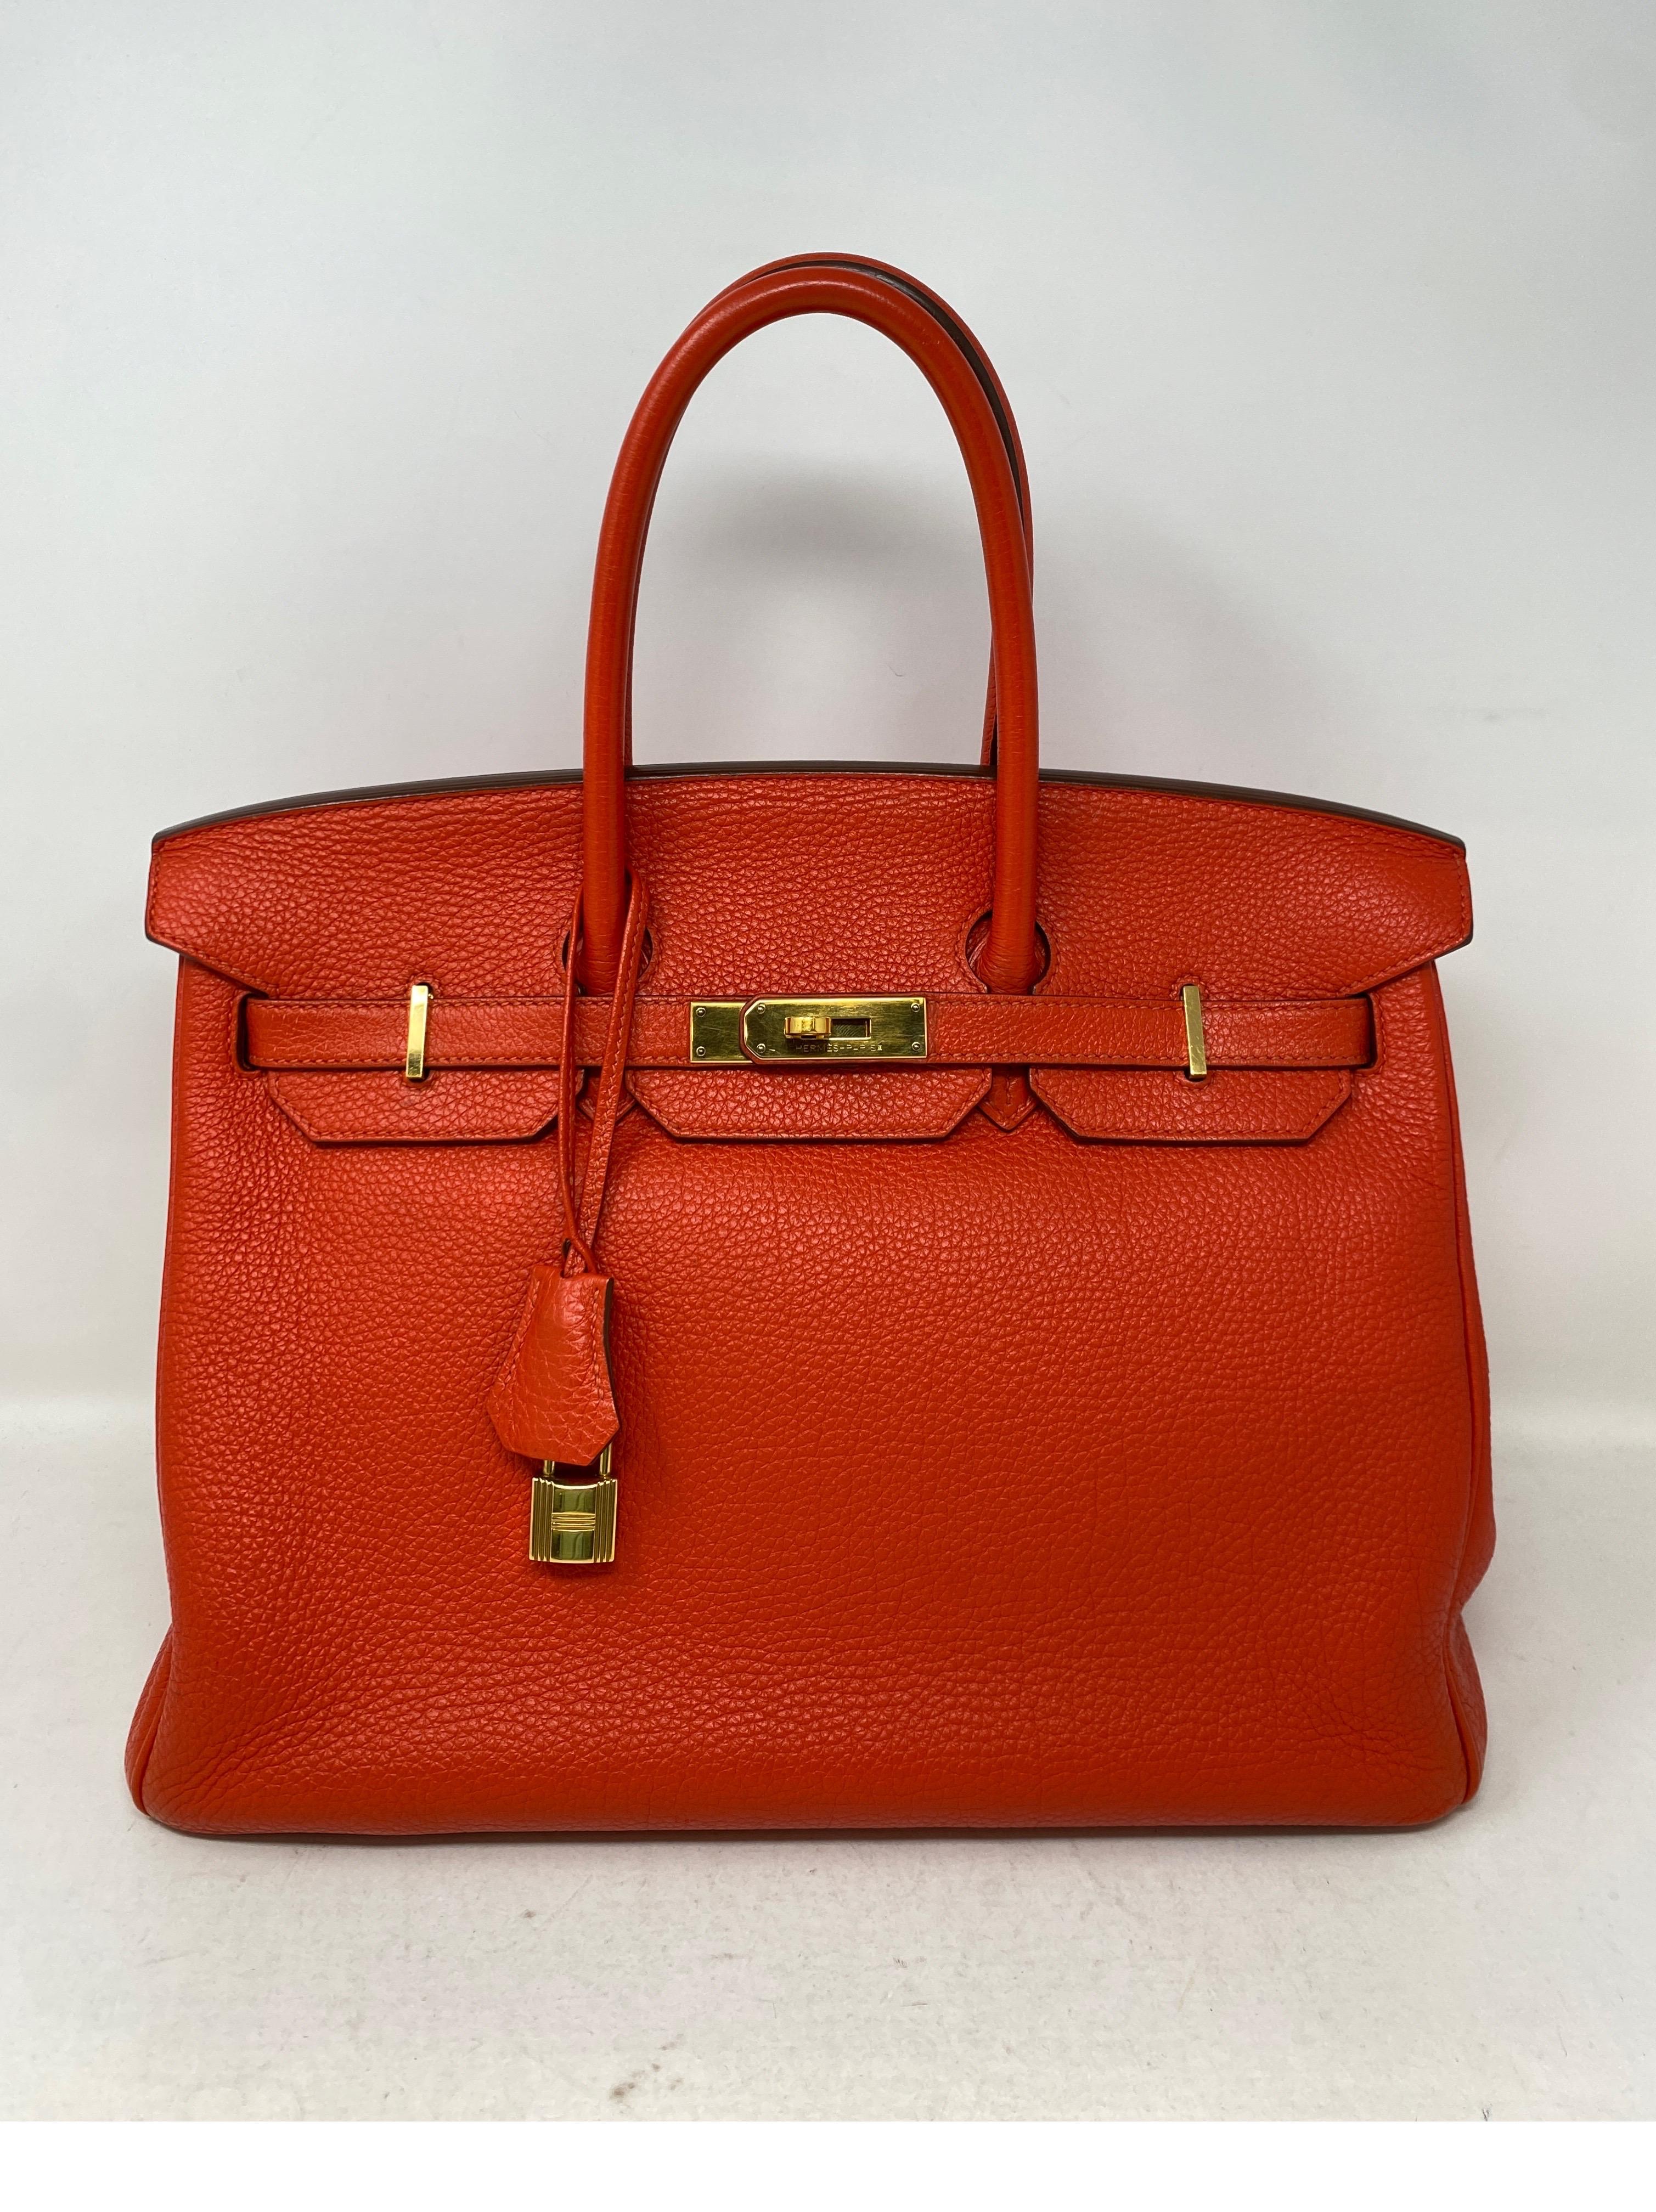 Hermes Capucine Birkin 35 Bag. Rare poppy orange red color bag. Togo leather. Excellent condition. Interior clean. Includes clochette, lock, keys, and dust bag. Guaranteed authentic. 